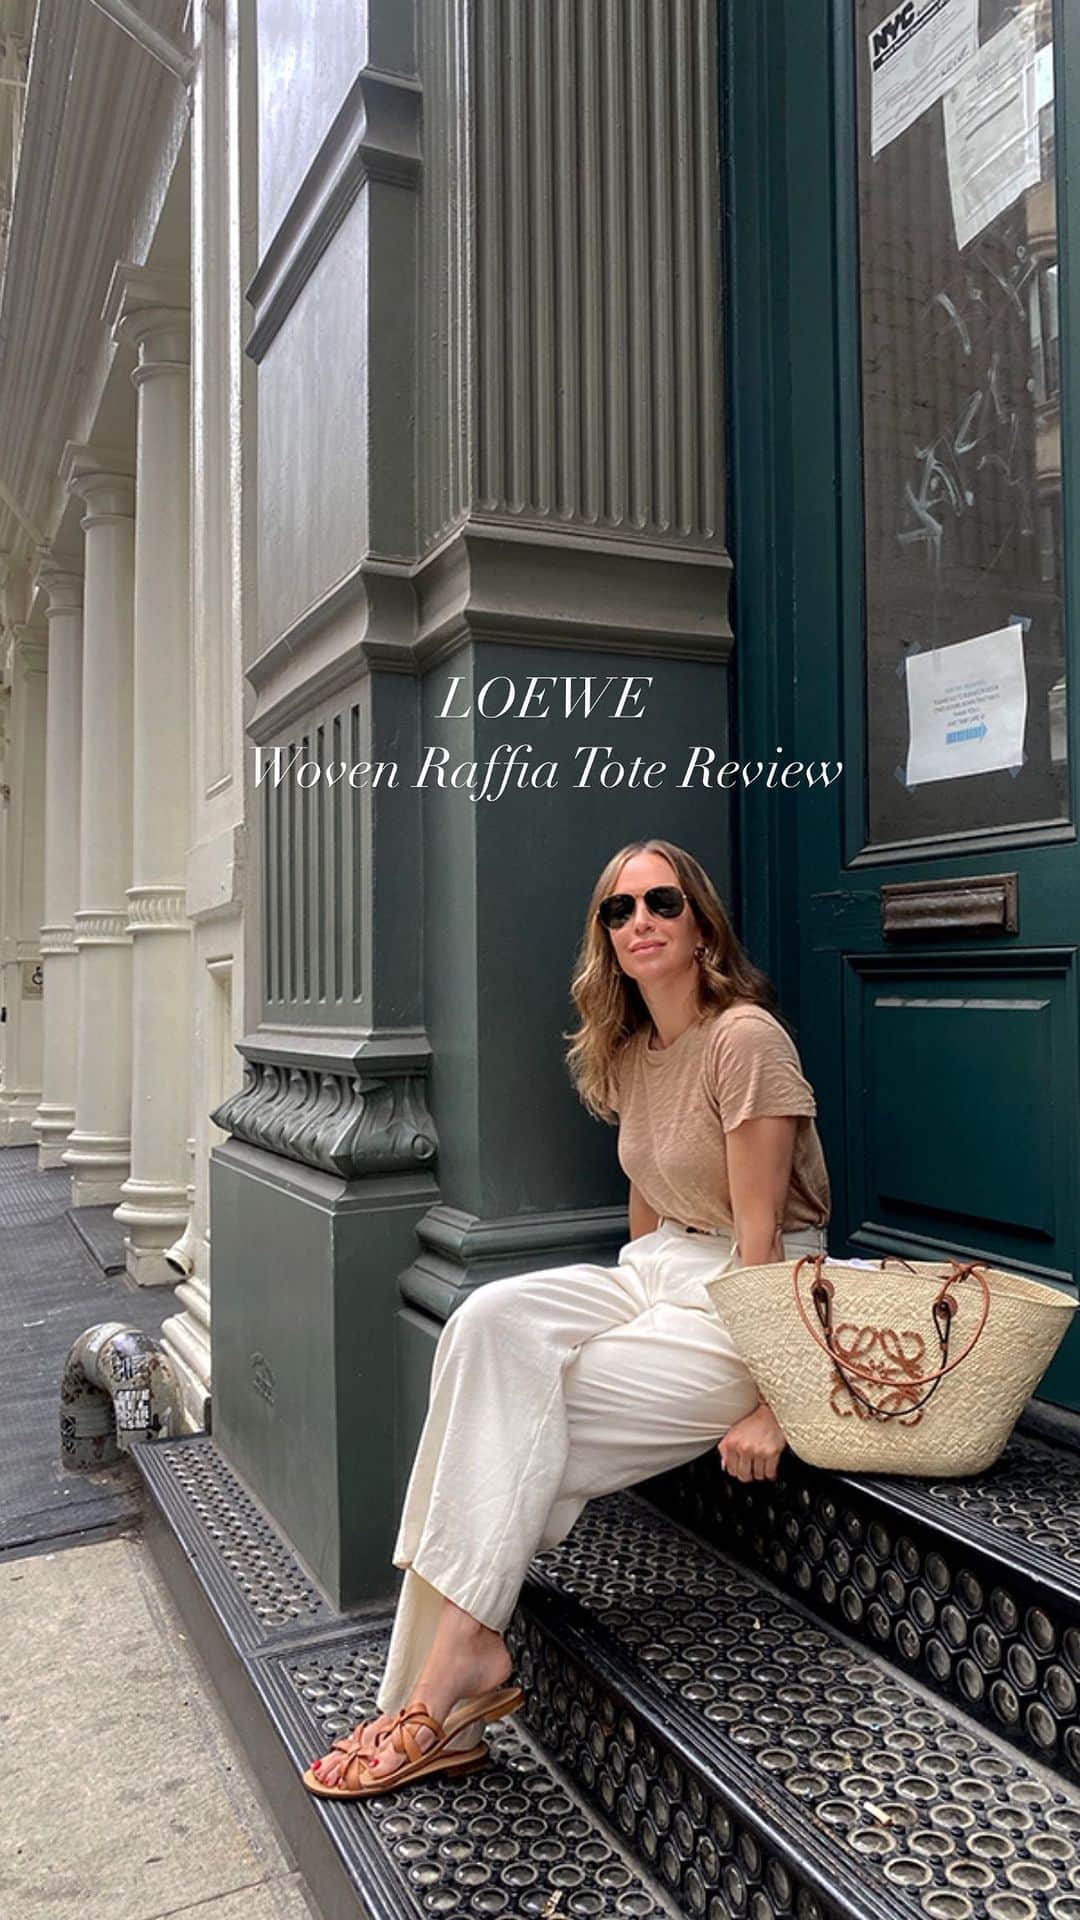 Helena Glazer Hodneのインスタグラム：「The #LoeweWovenRaffia Tote: "is it worth it?" a question I often receive. I love the look of it, but if you're wanting something to stand the test of time, this isn't it. Loewe (and many other brands) makes straw bags that are way sturdier. If I knew what I know now, I'd go that route. Do I still love the look? Yes. Would I get it again? No.  #loewetote」